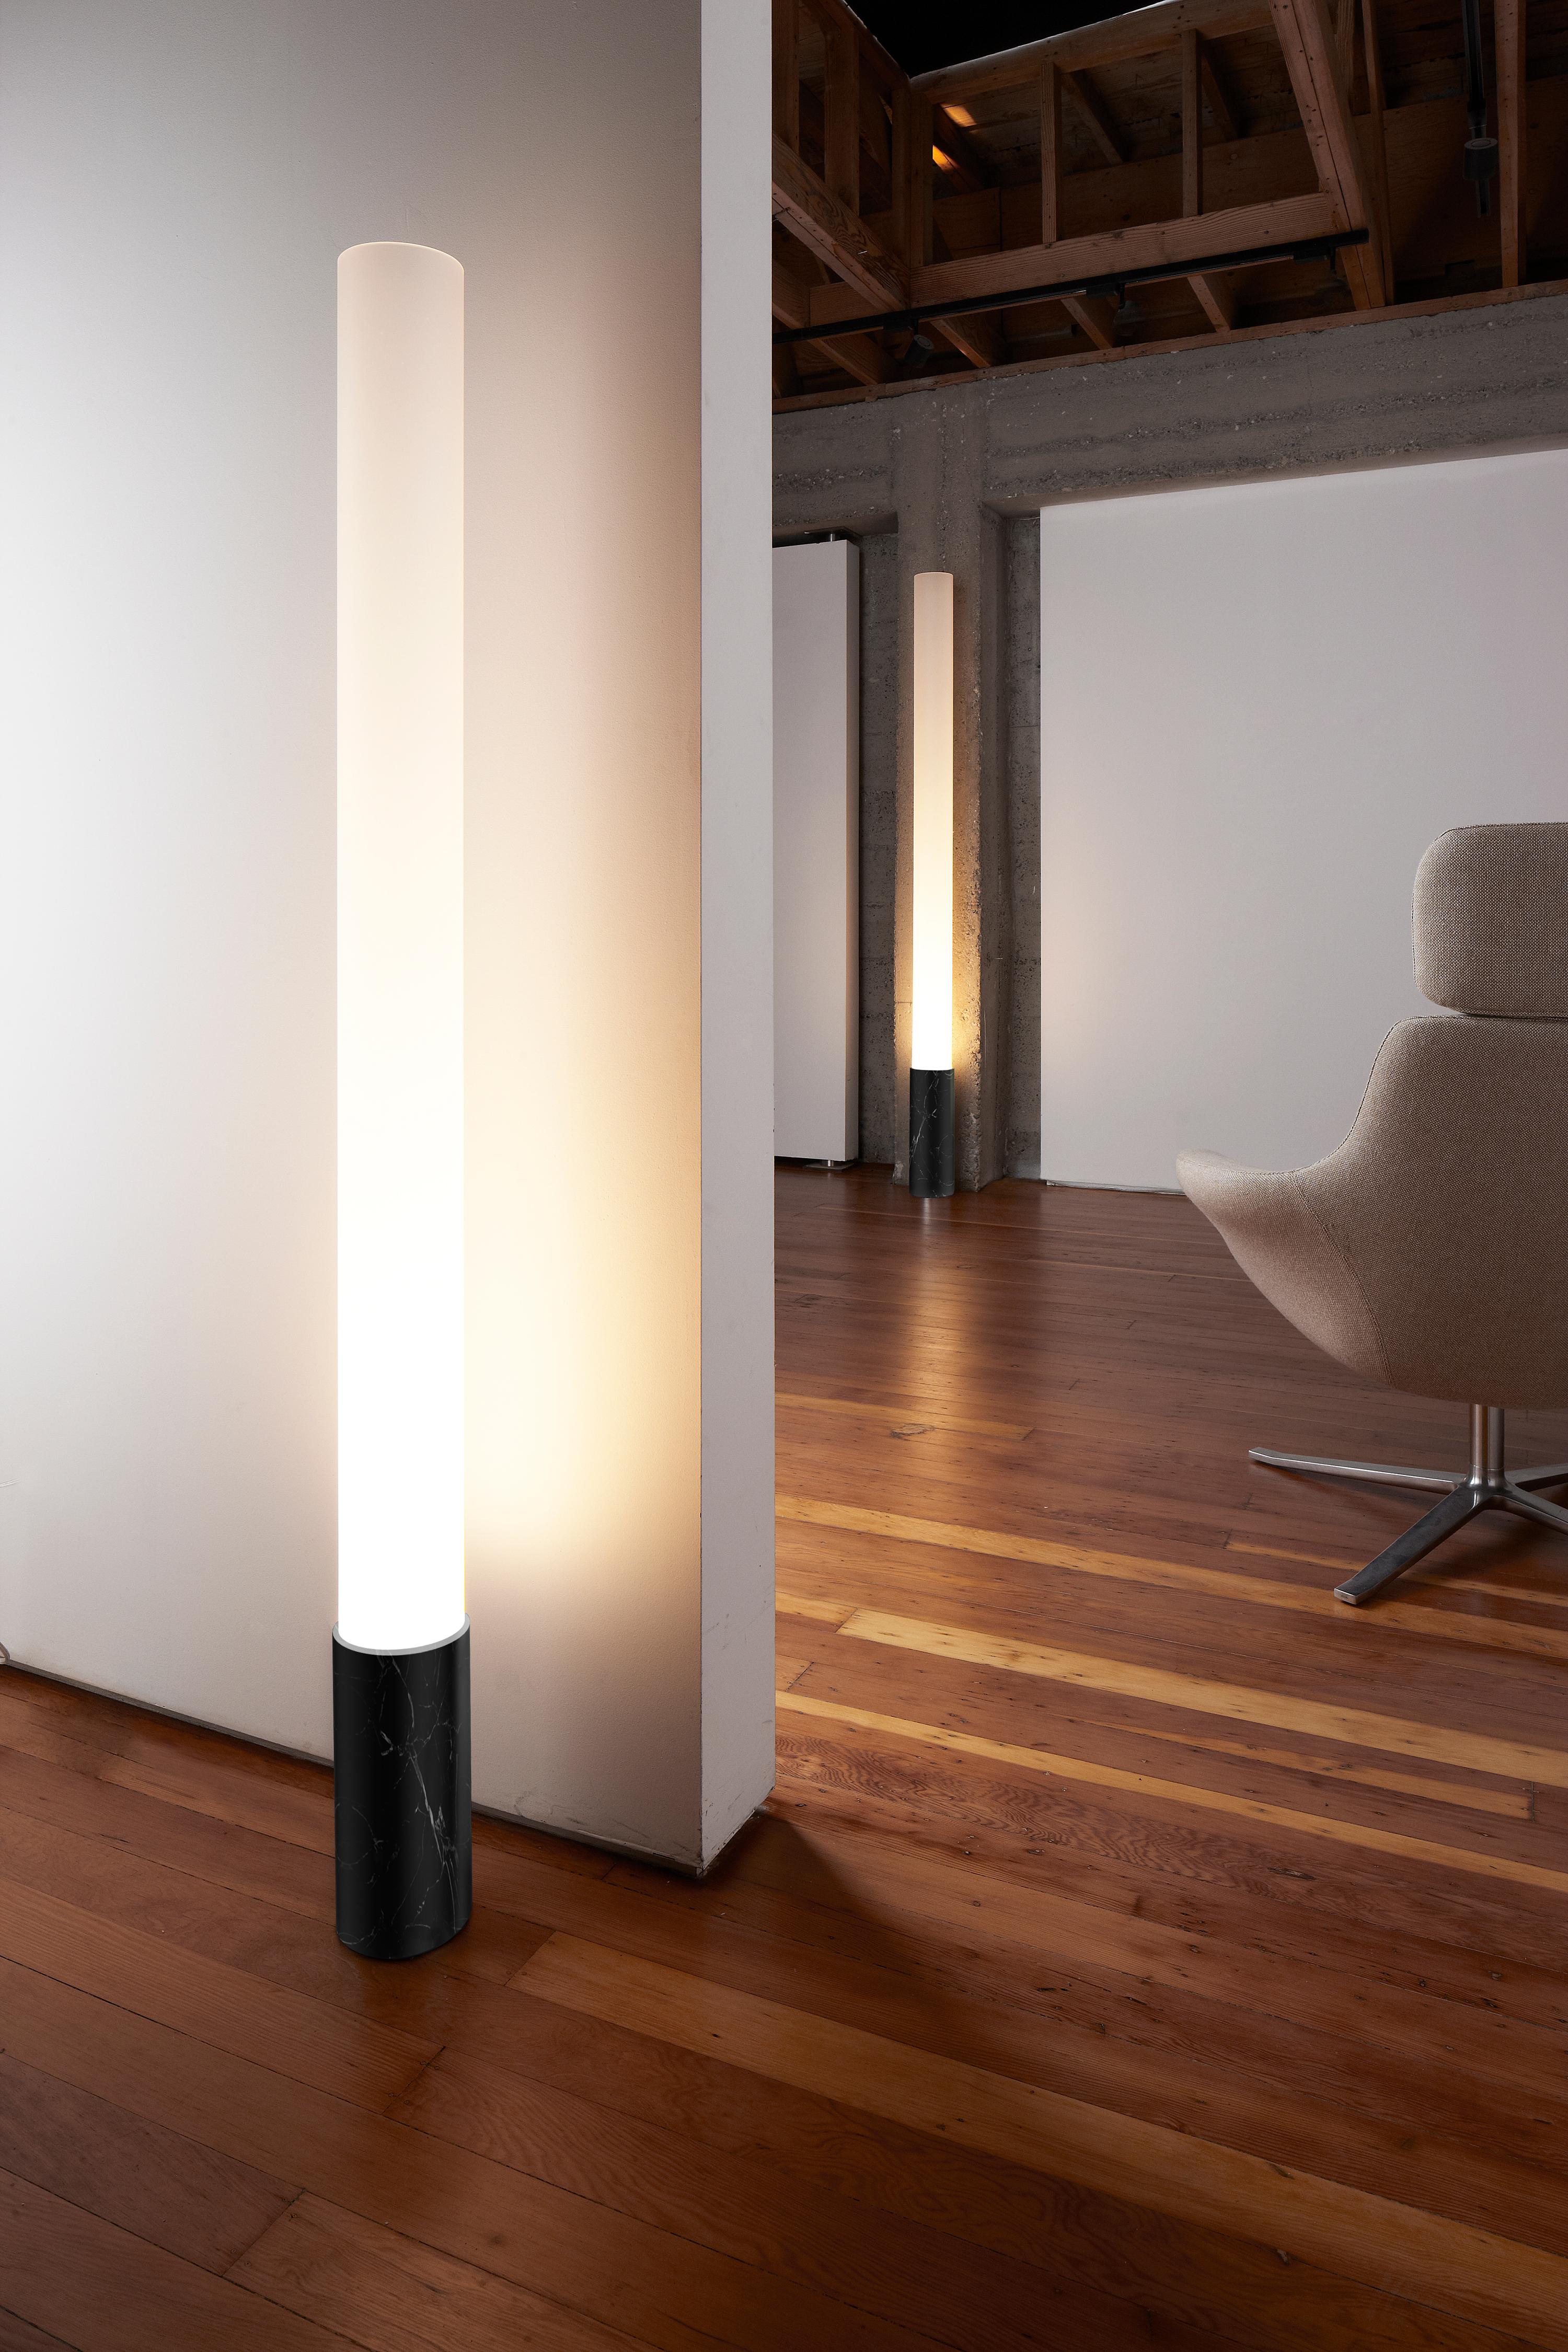 The timeless Elise lamp pays tribute to the advent of the machine age. Its refined machined marble base, combined with its towering frosted acrylic diffuser serves as the perfect combination for elegant lighting. Elise features full-range dimming